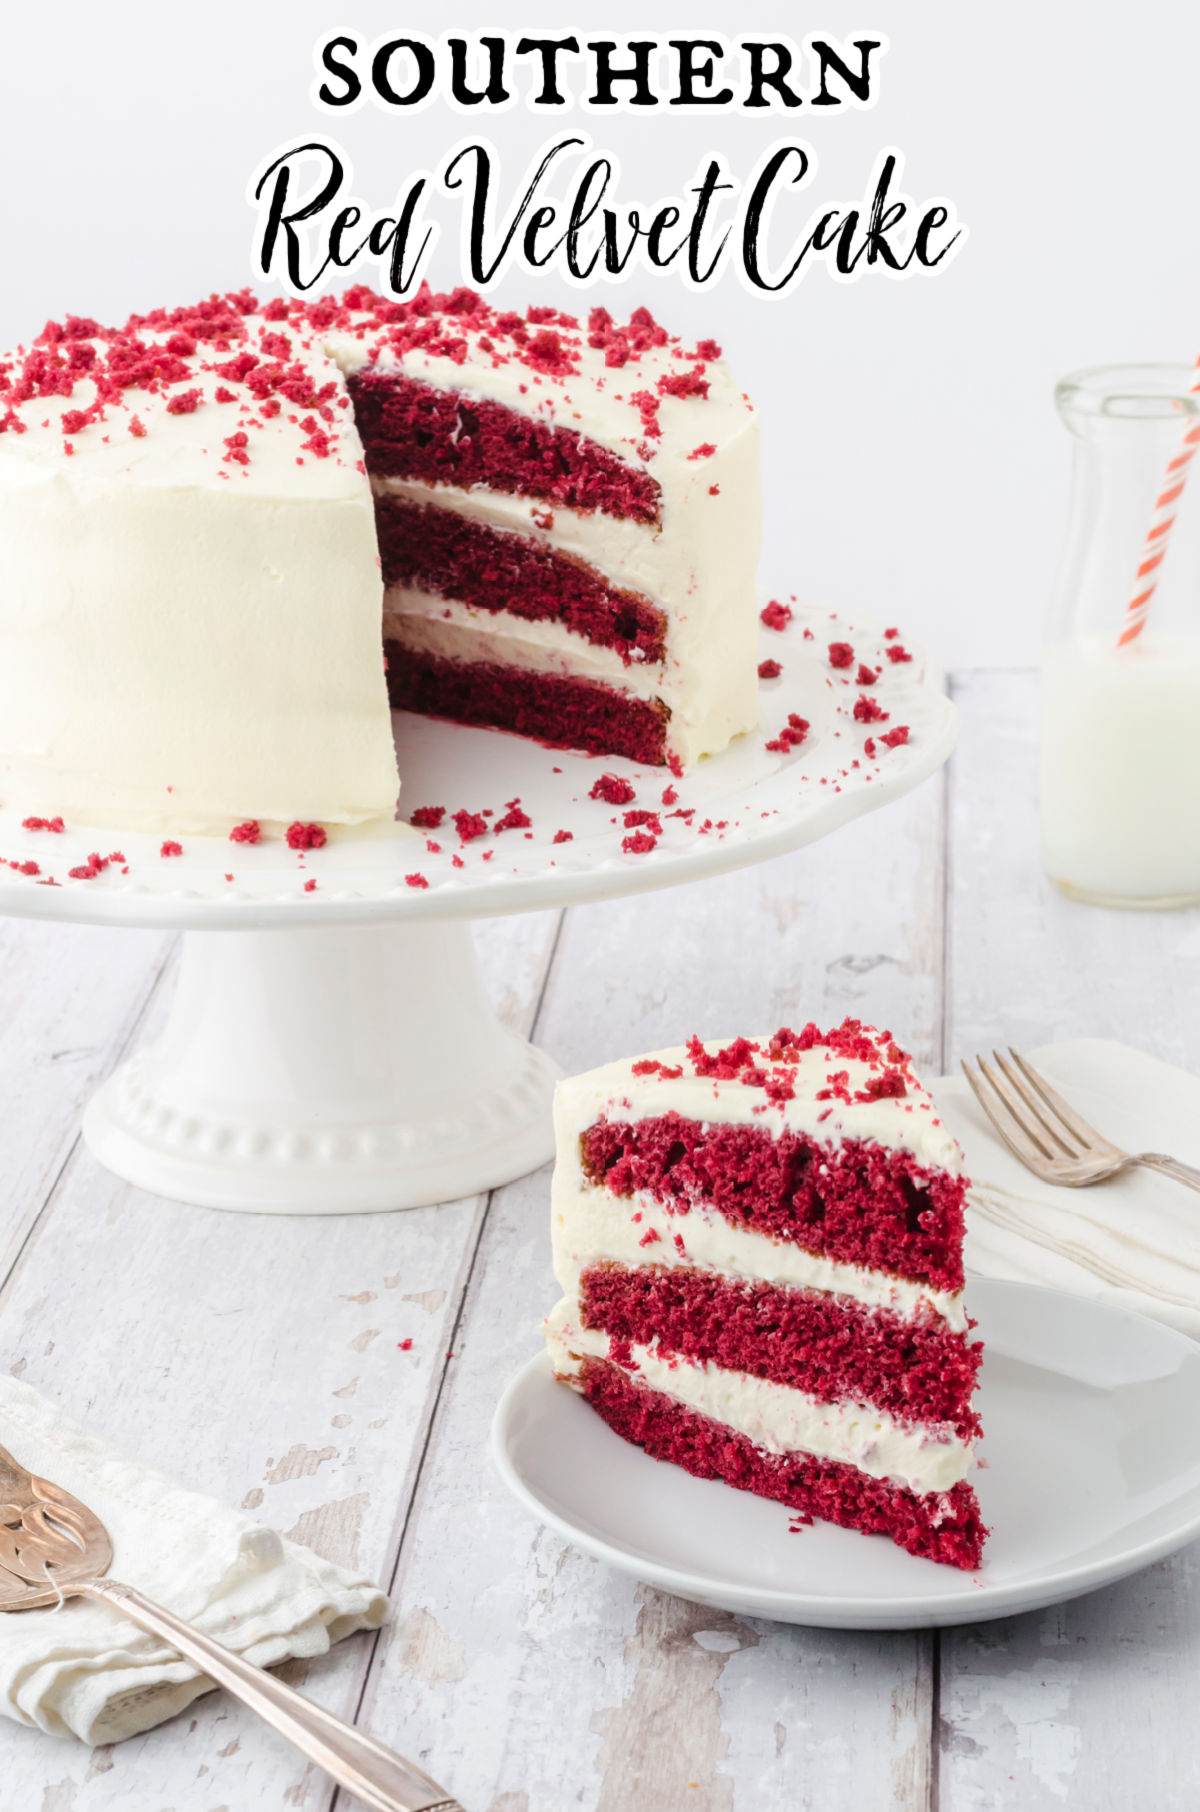 Title image; a slice of red velvet cake with a text overlay.